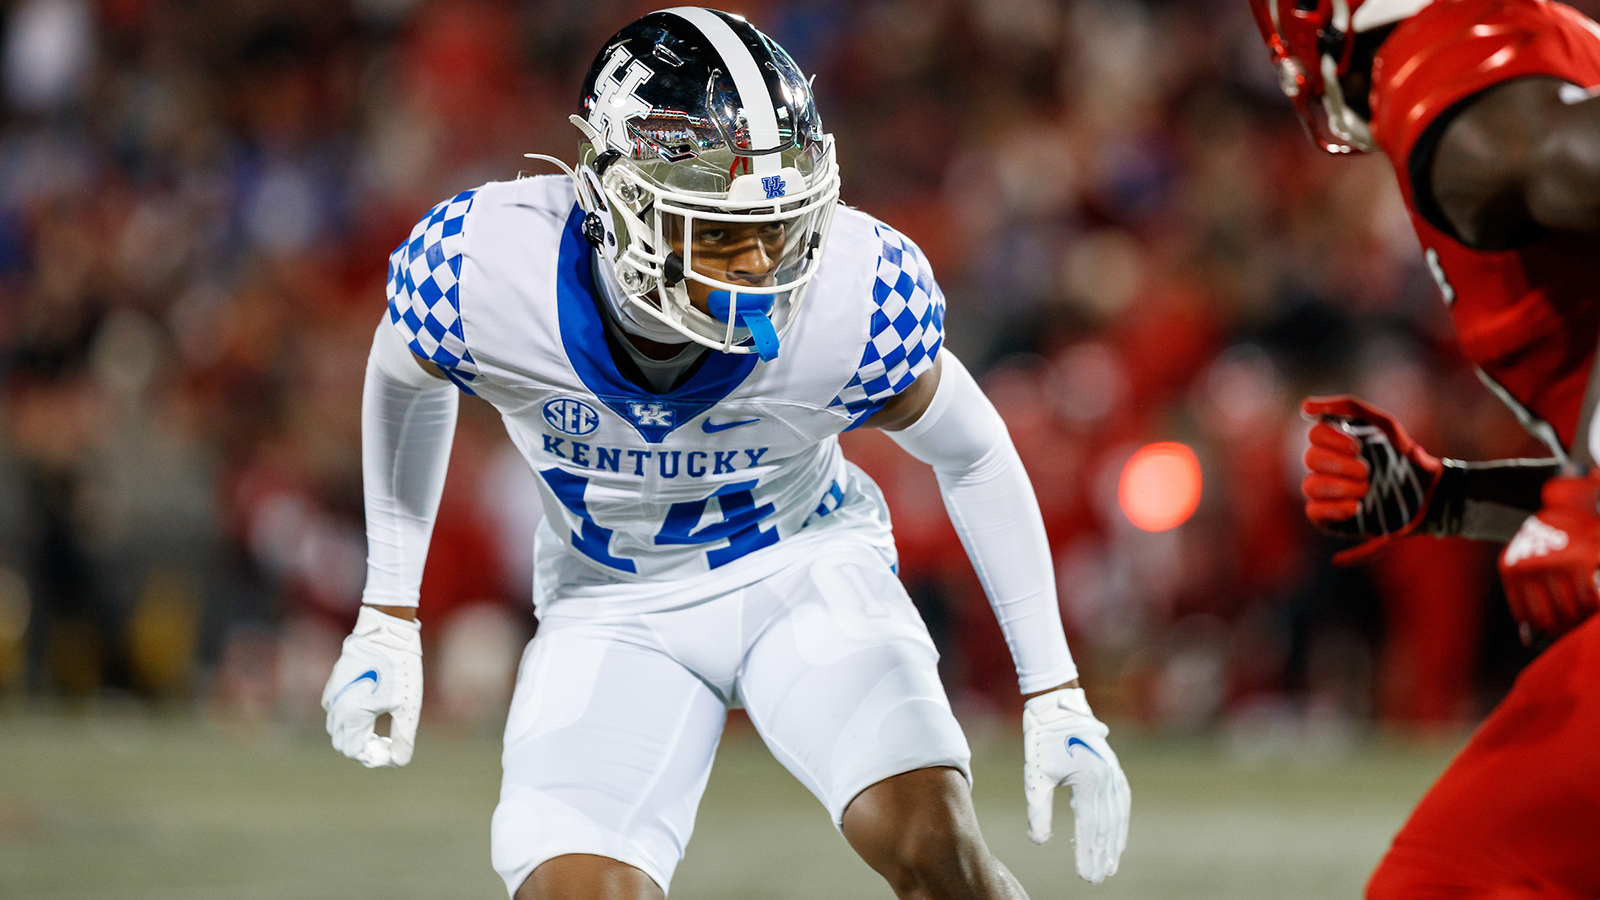 Kentucky Defense Blending Experience and Youth